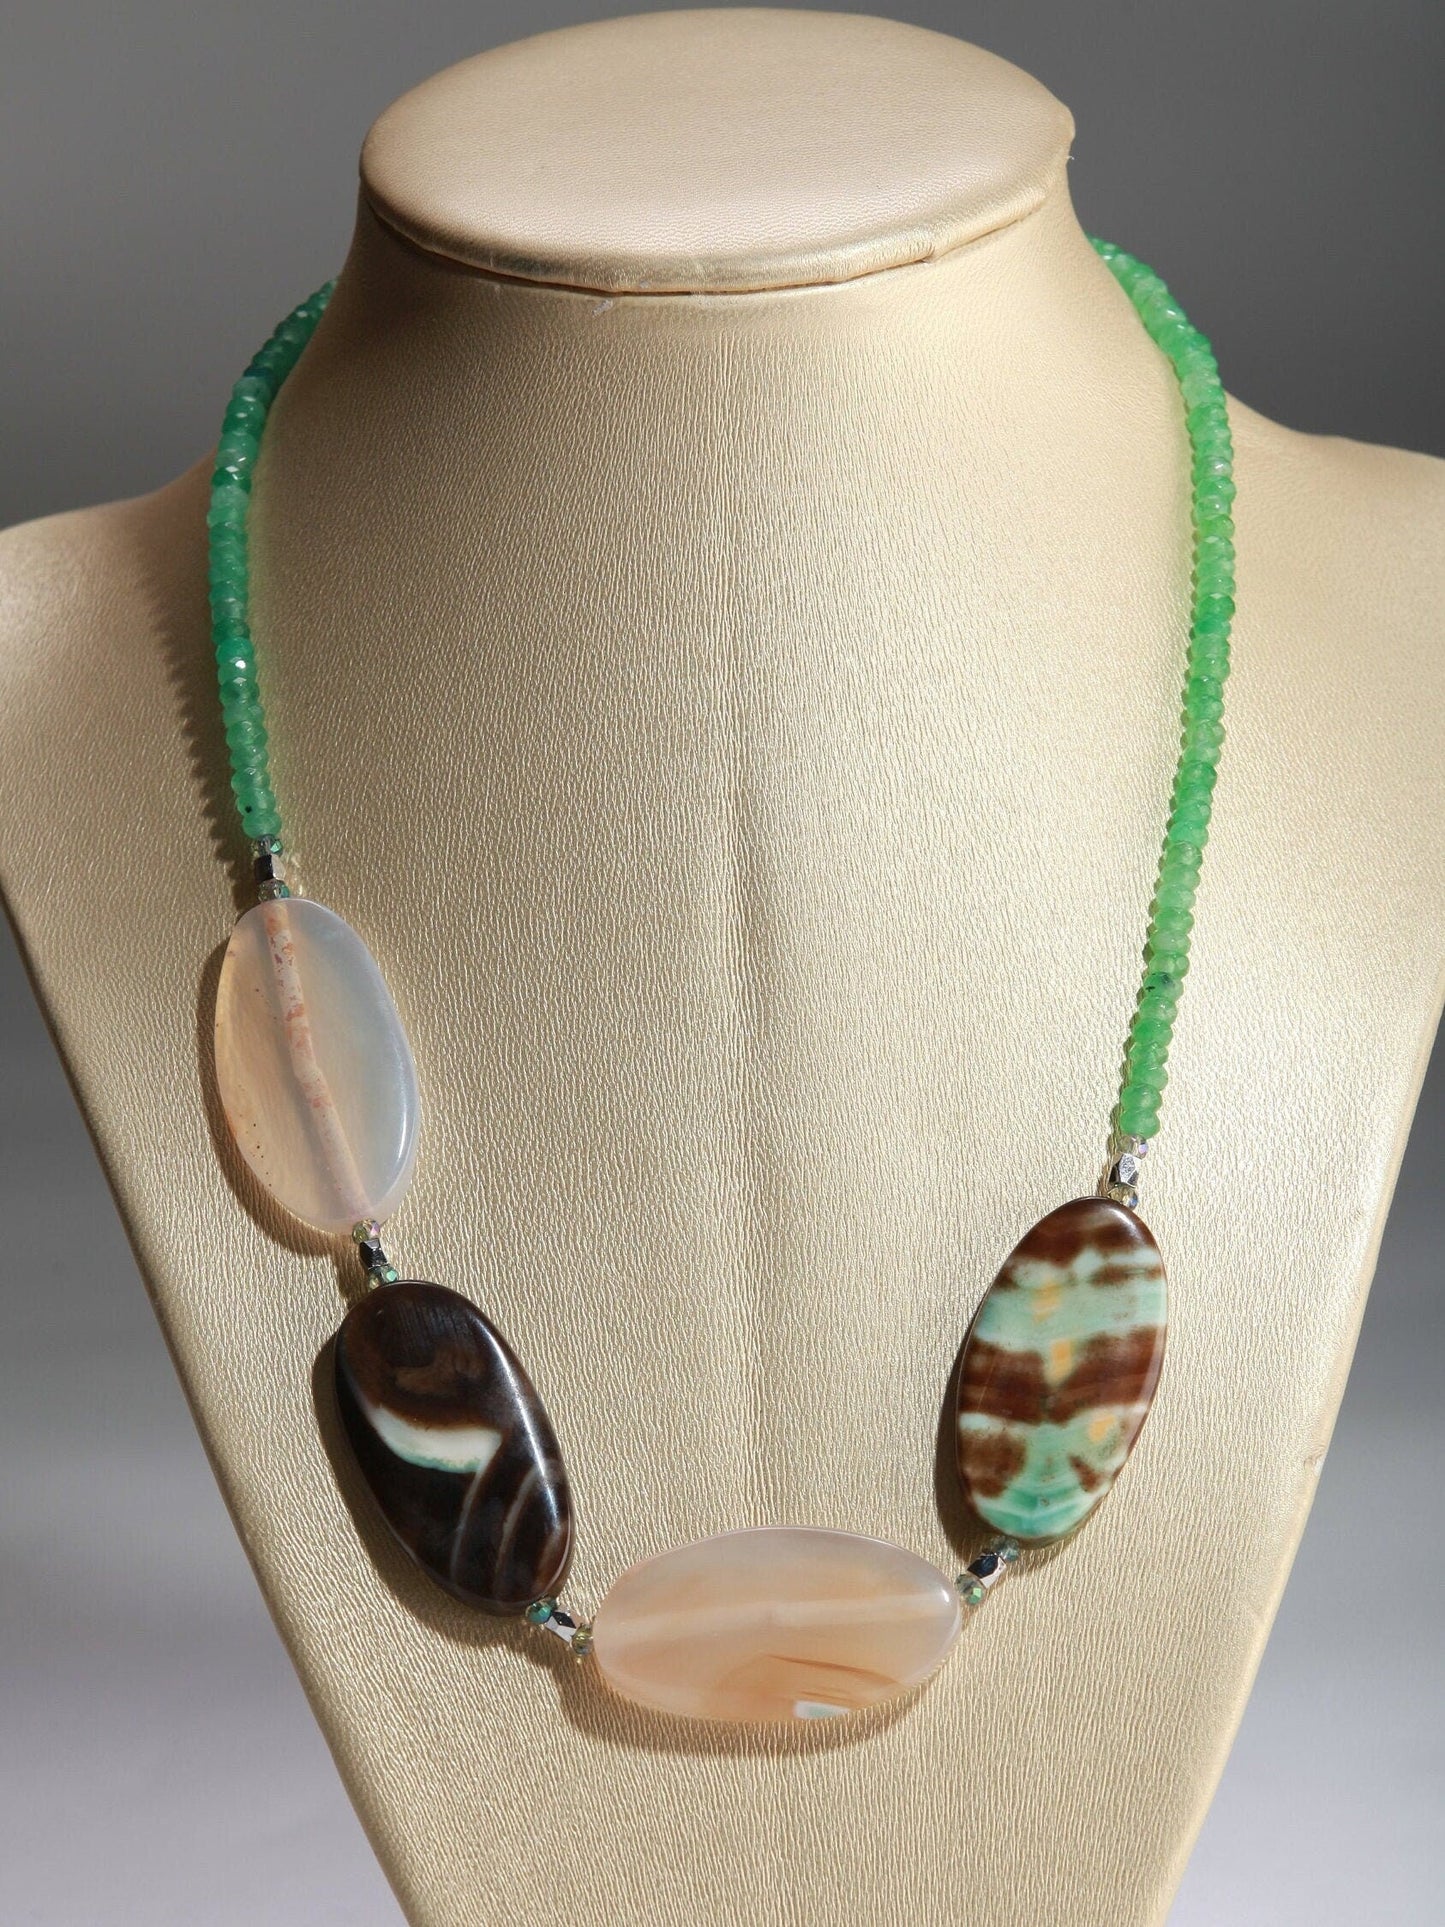 Chrysoprase 4mm faceted roundel with 22x38large natural green banded Agate silver necklace, 18” plus 2” extension